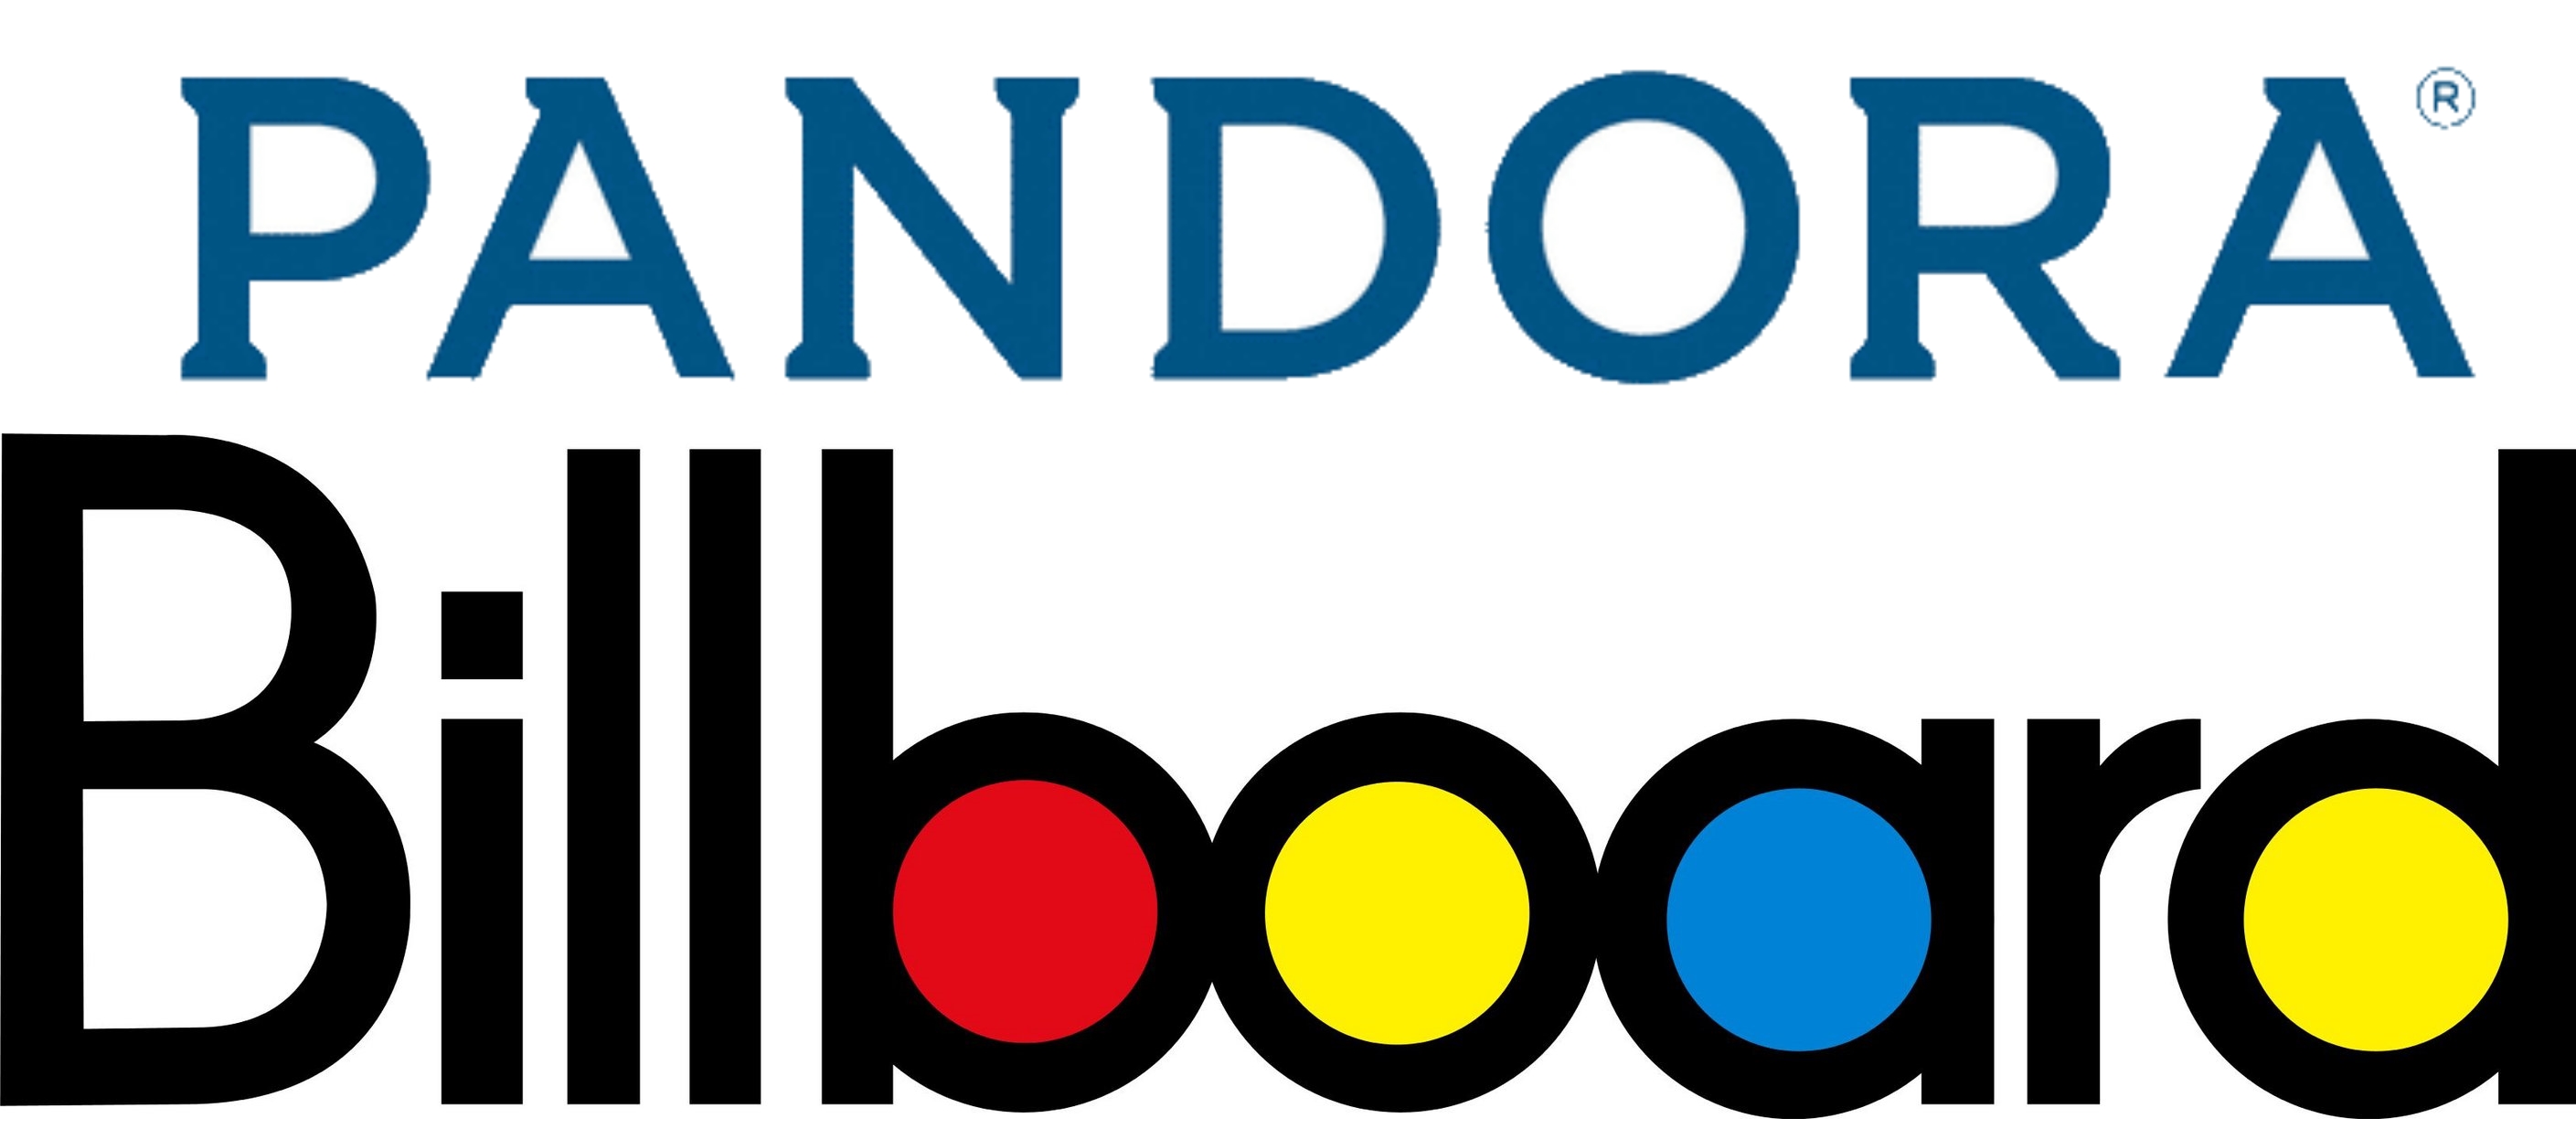 Pandora streams are now included in Billboard’s music charts